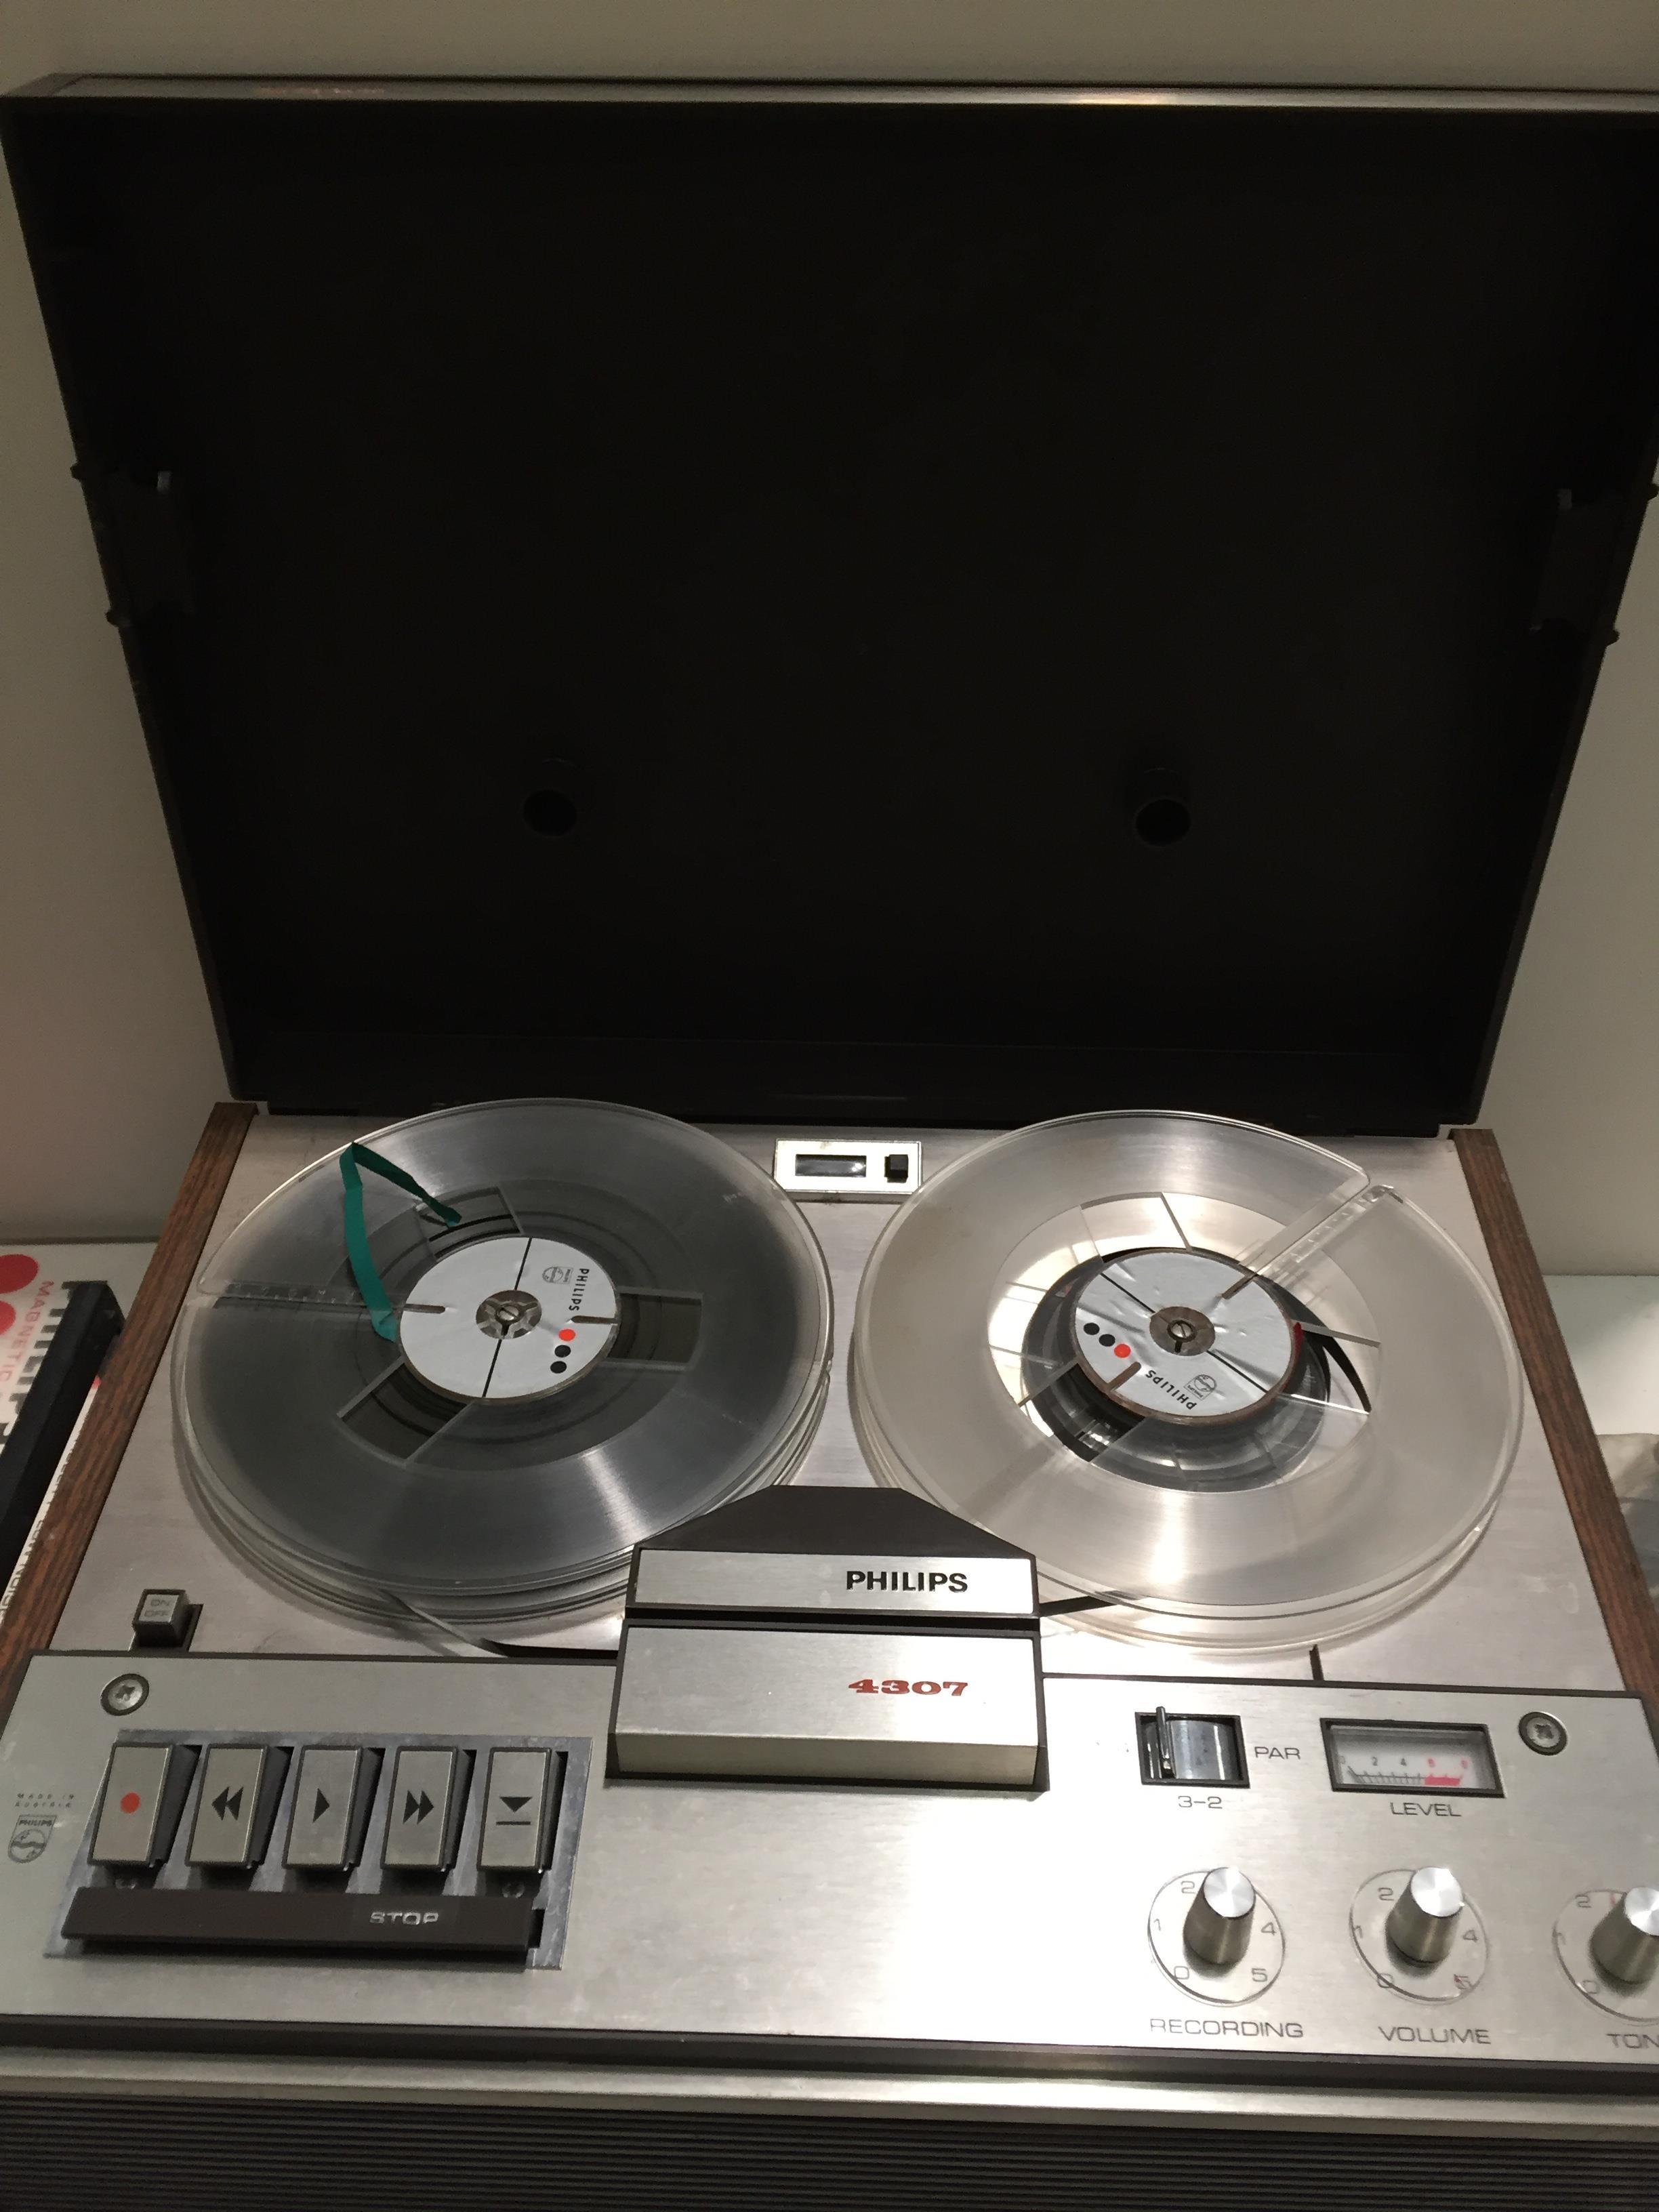 Philips 4307 Tape Recorder complete with microphone and spare cassette of tape and Sanyo microphone - Image 2 of 3